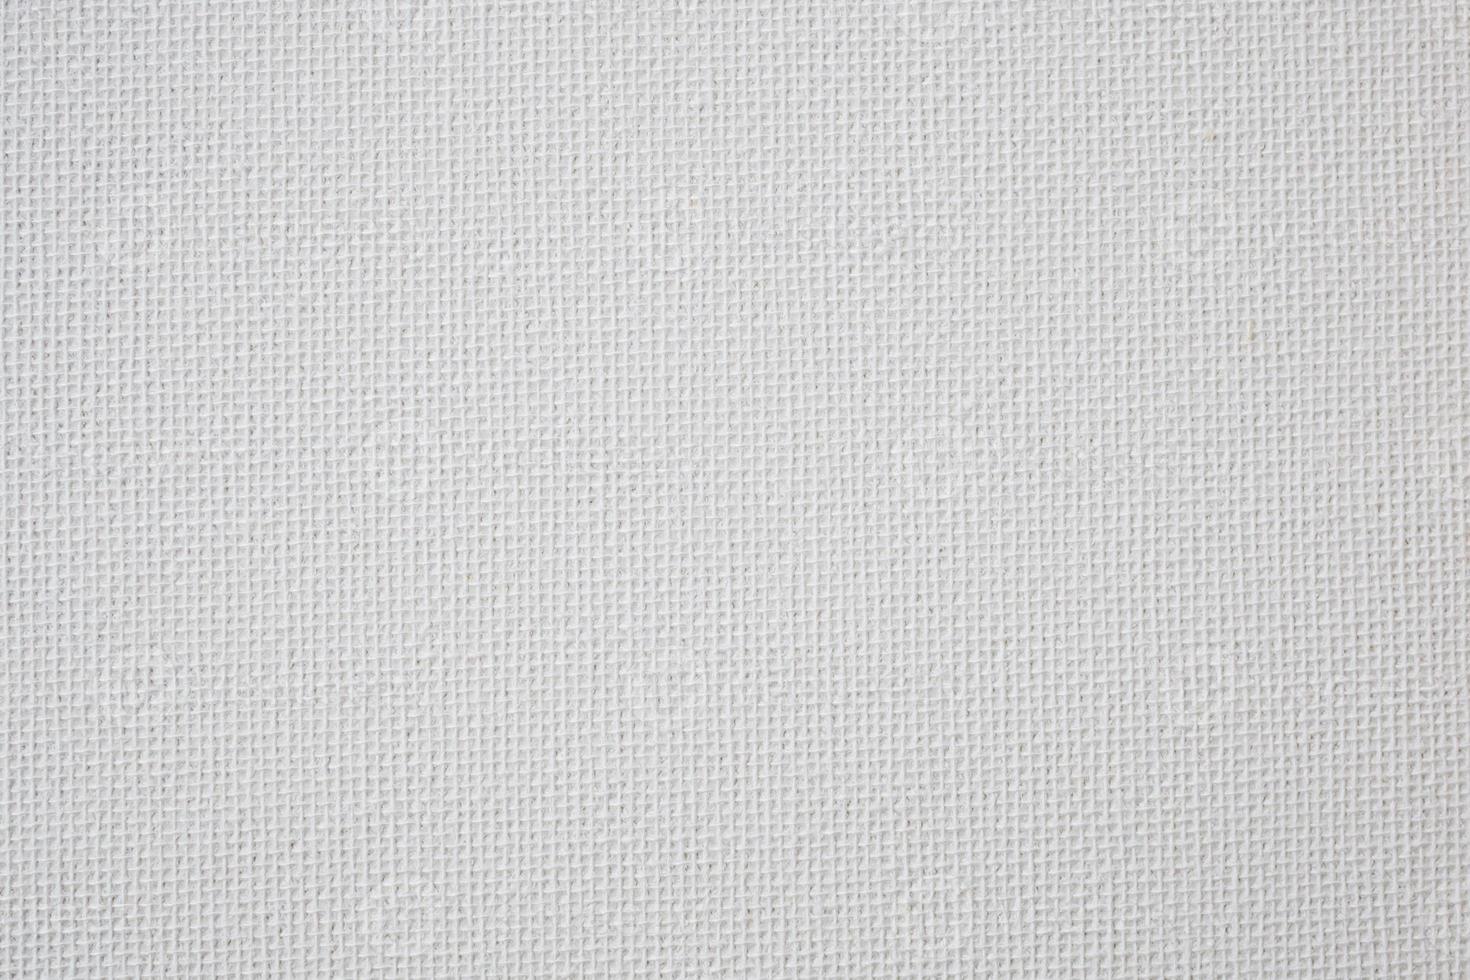 https://static.vecteezy.com/system/resources/previews/012/601/621/non_2x/white-canvas-texture-background-photo.jpg